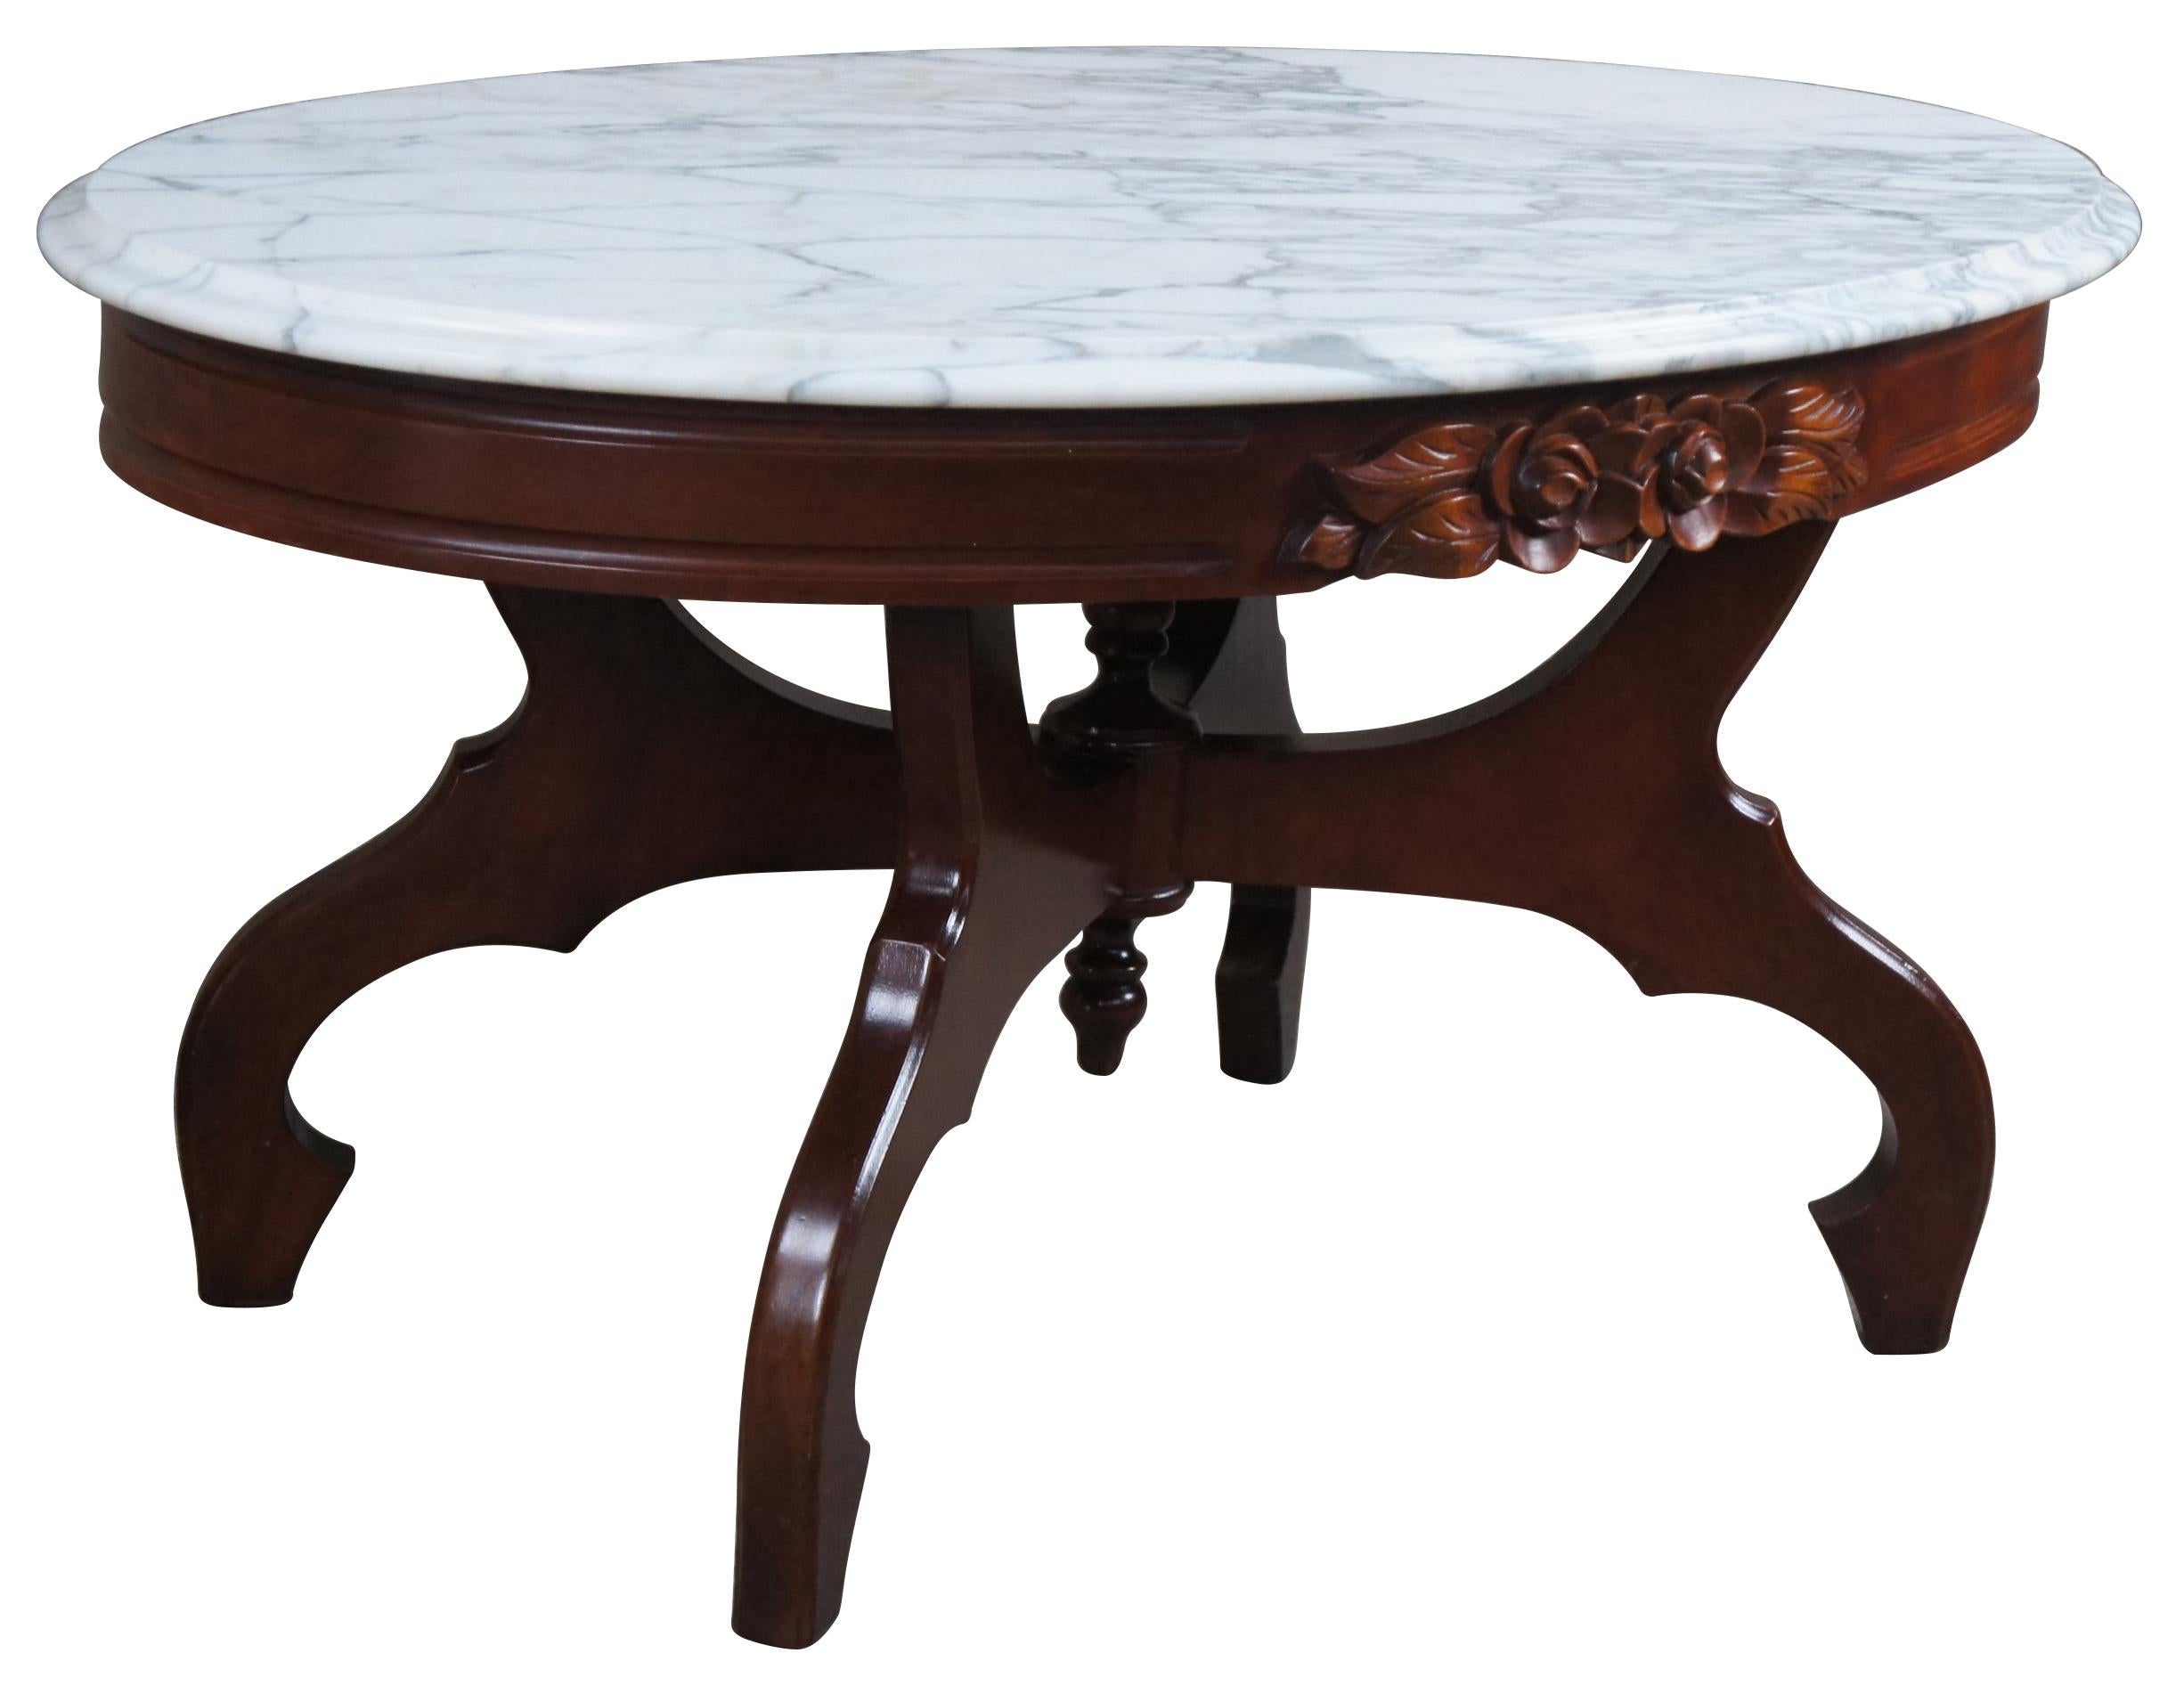 Vintage Victorian reproduction parlor table by Kimball Furniture. Made from mahogany with an oval white Italian marble top. Features a rose carved apron over a four legged base centered by finials.